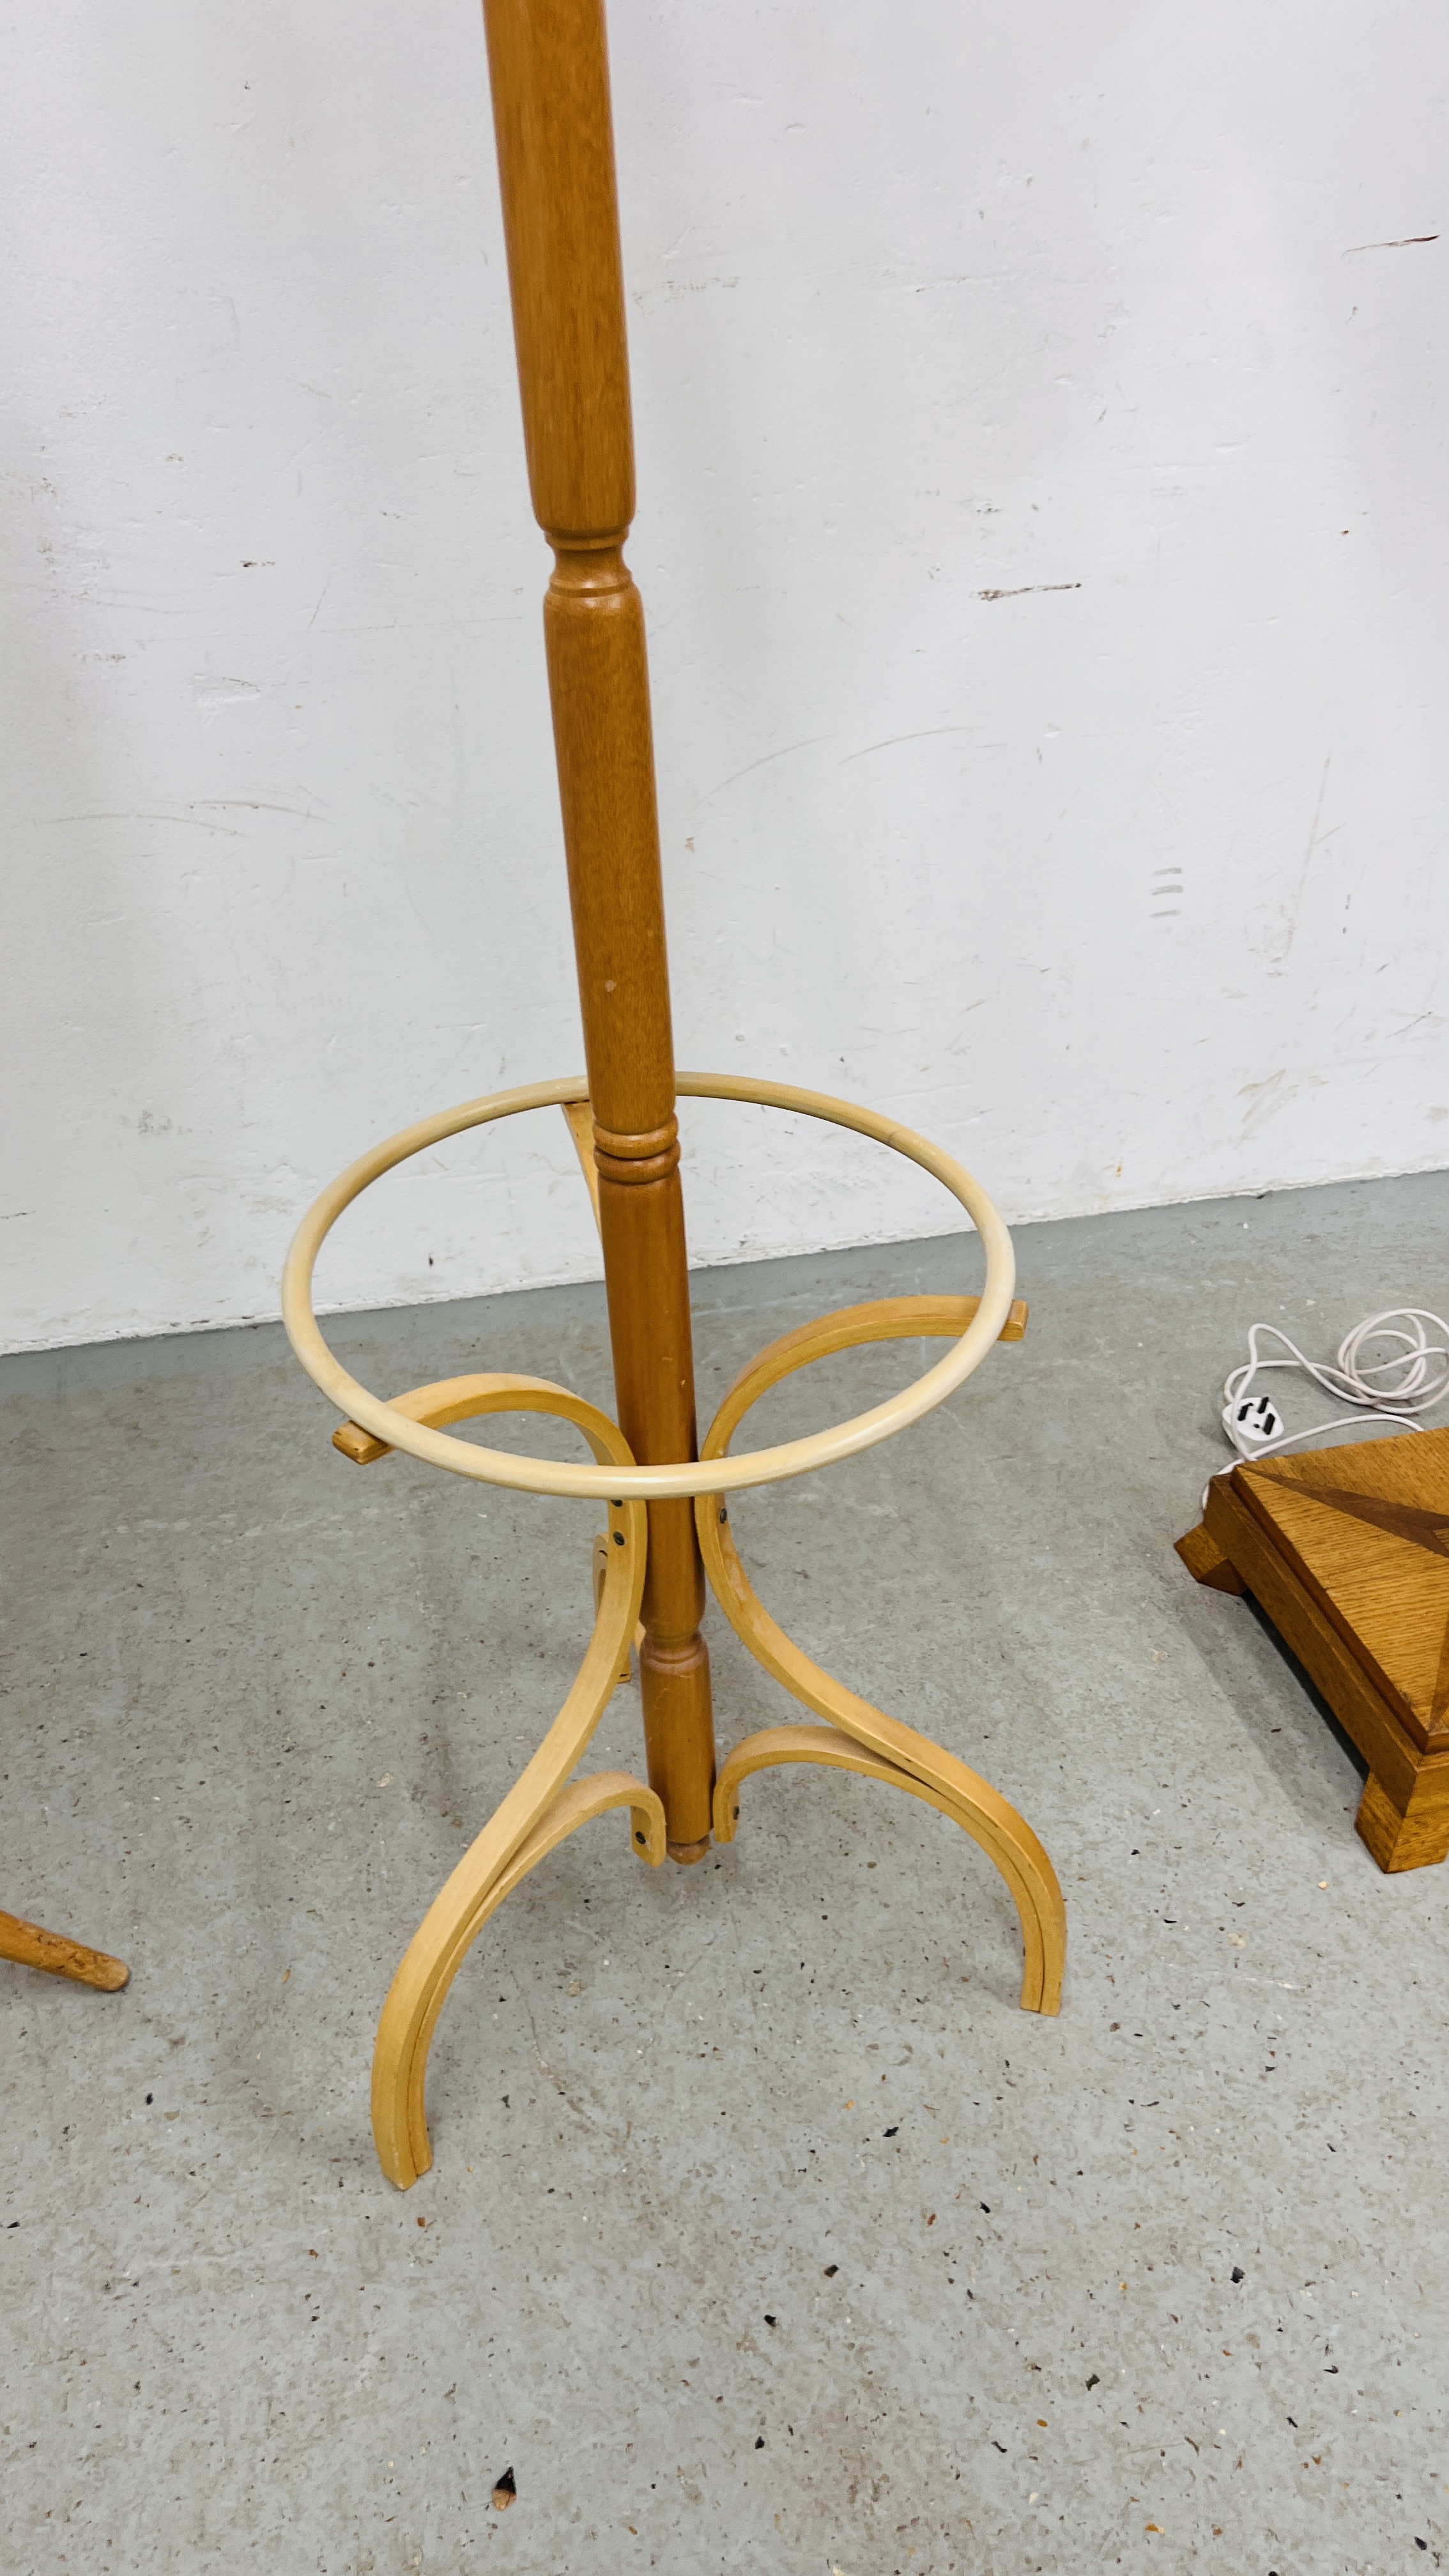 A RETRO BEECH WOOD TRIPOD FOOTED STANDARD LAMP WITH SHADE - WIRE REMOVED - DECO STYLE STANDARD LAMP - Image 6 of 8